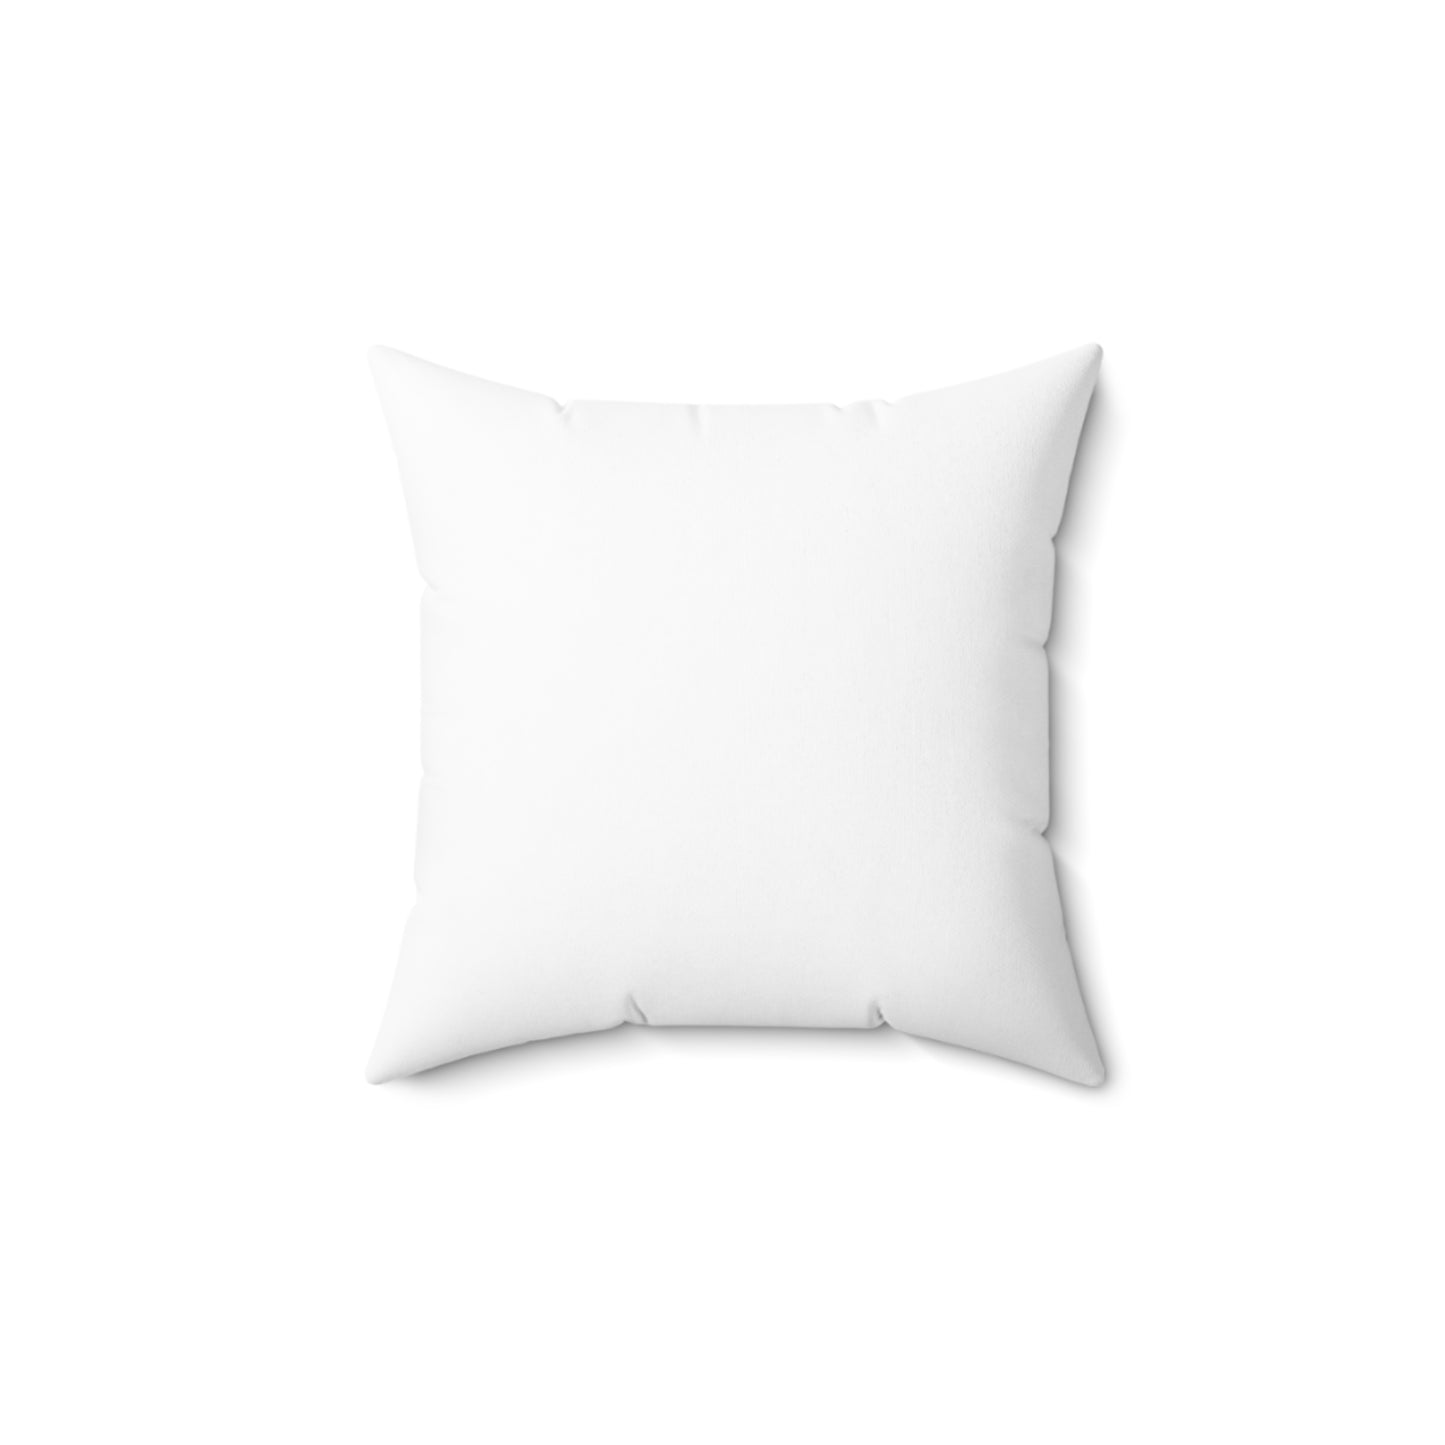 Stay on horse,  stay on course Spun Polyester Square Pillow